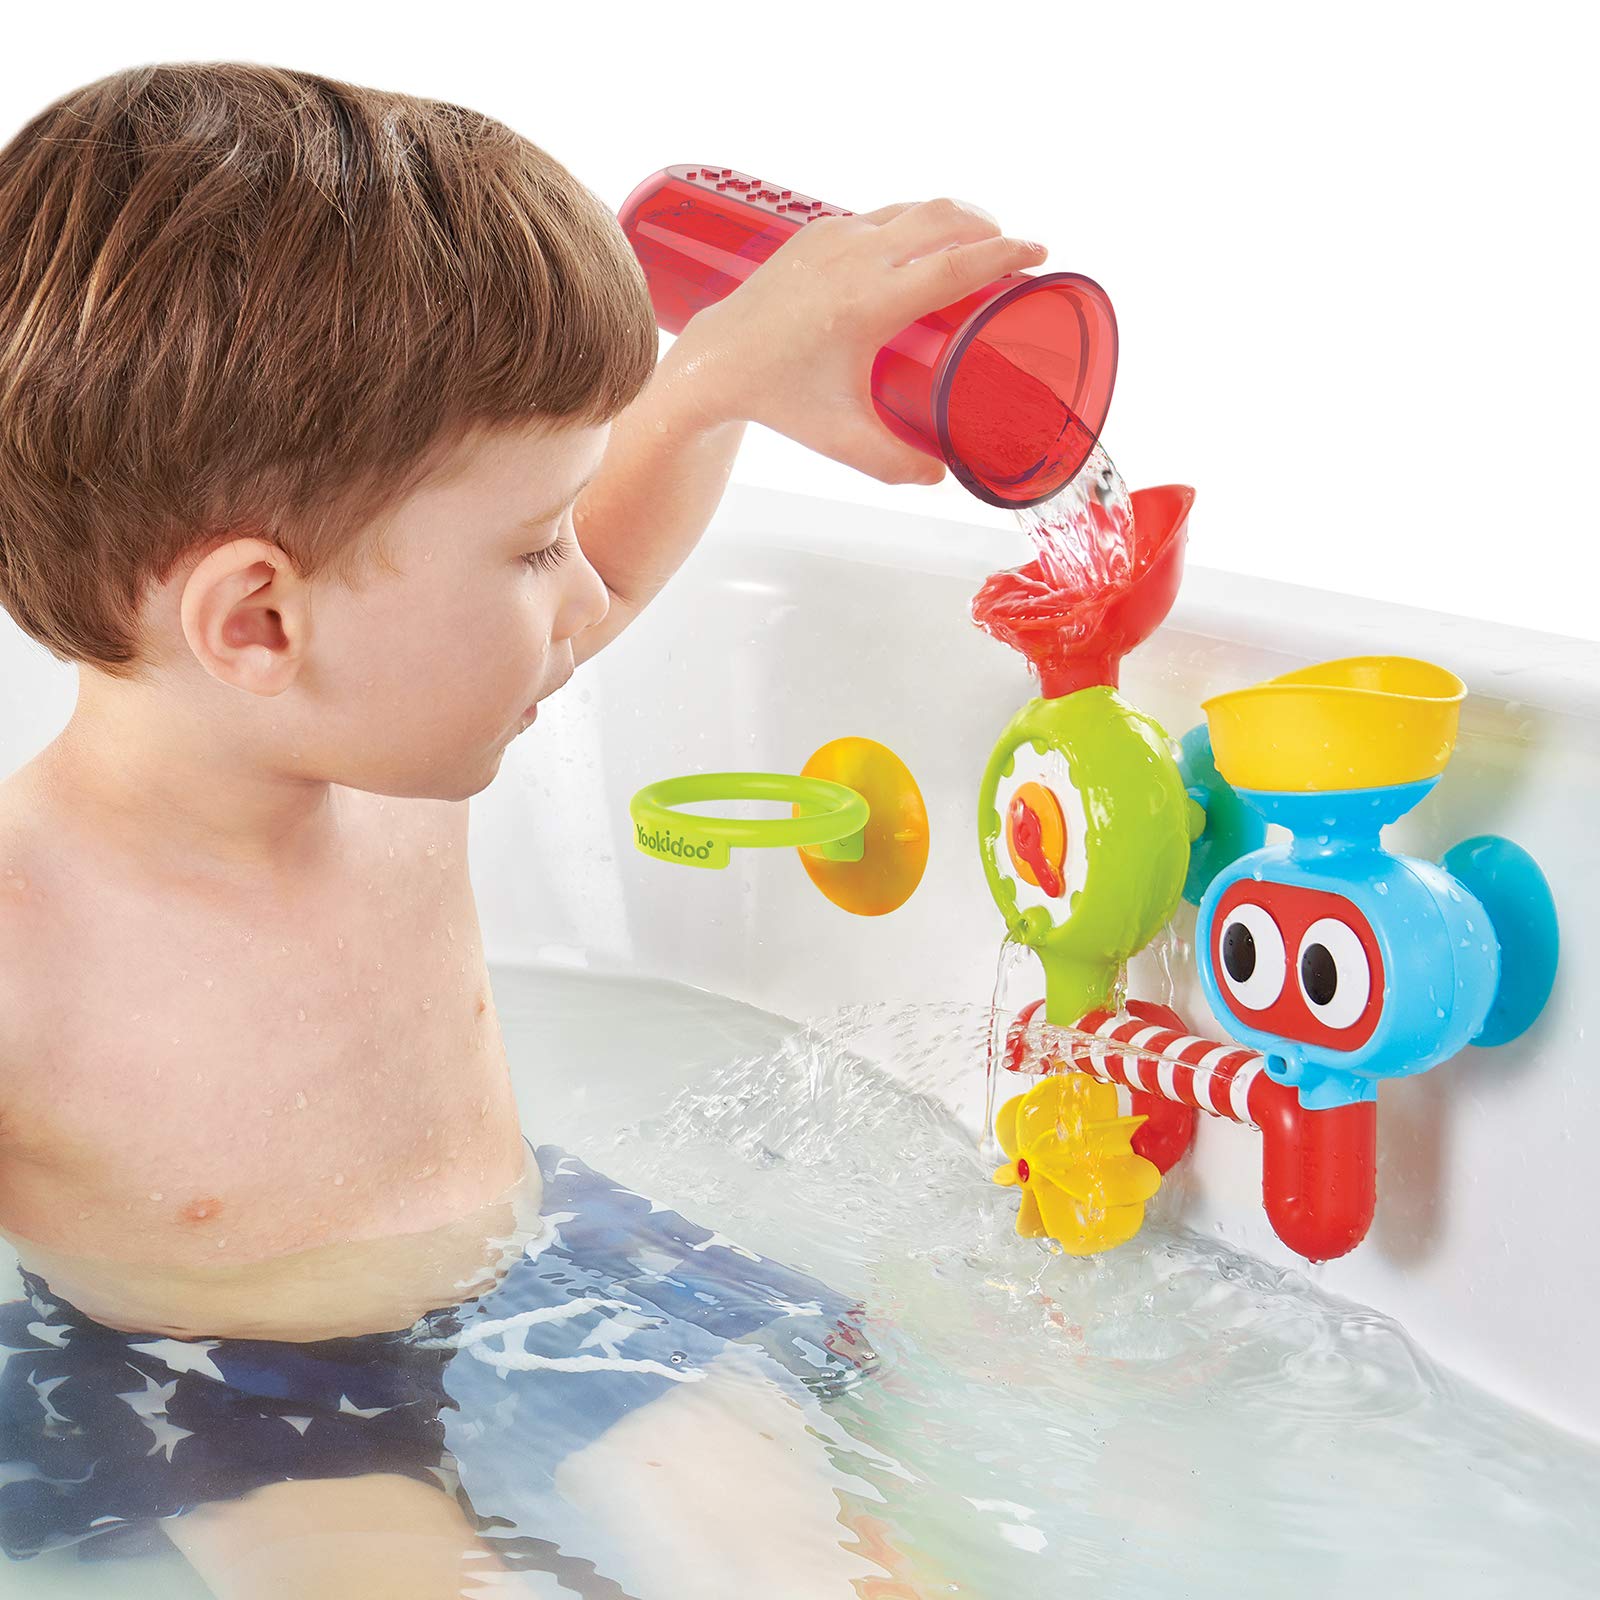 Yookidoo Baby Bath Toy - Spin 'N' Sprinkle Water Lab - Spinning Gear and Googly Eyes for Toddler or Baby Bath Time Sensory Development - Attaches to Any Size Tub Wall (1-3 Years)